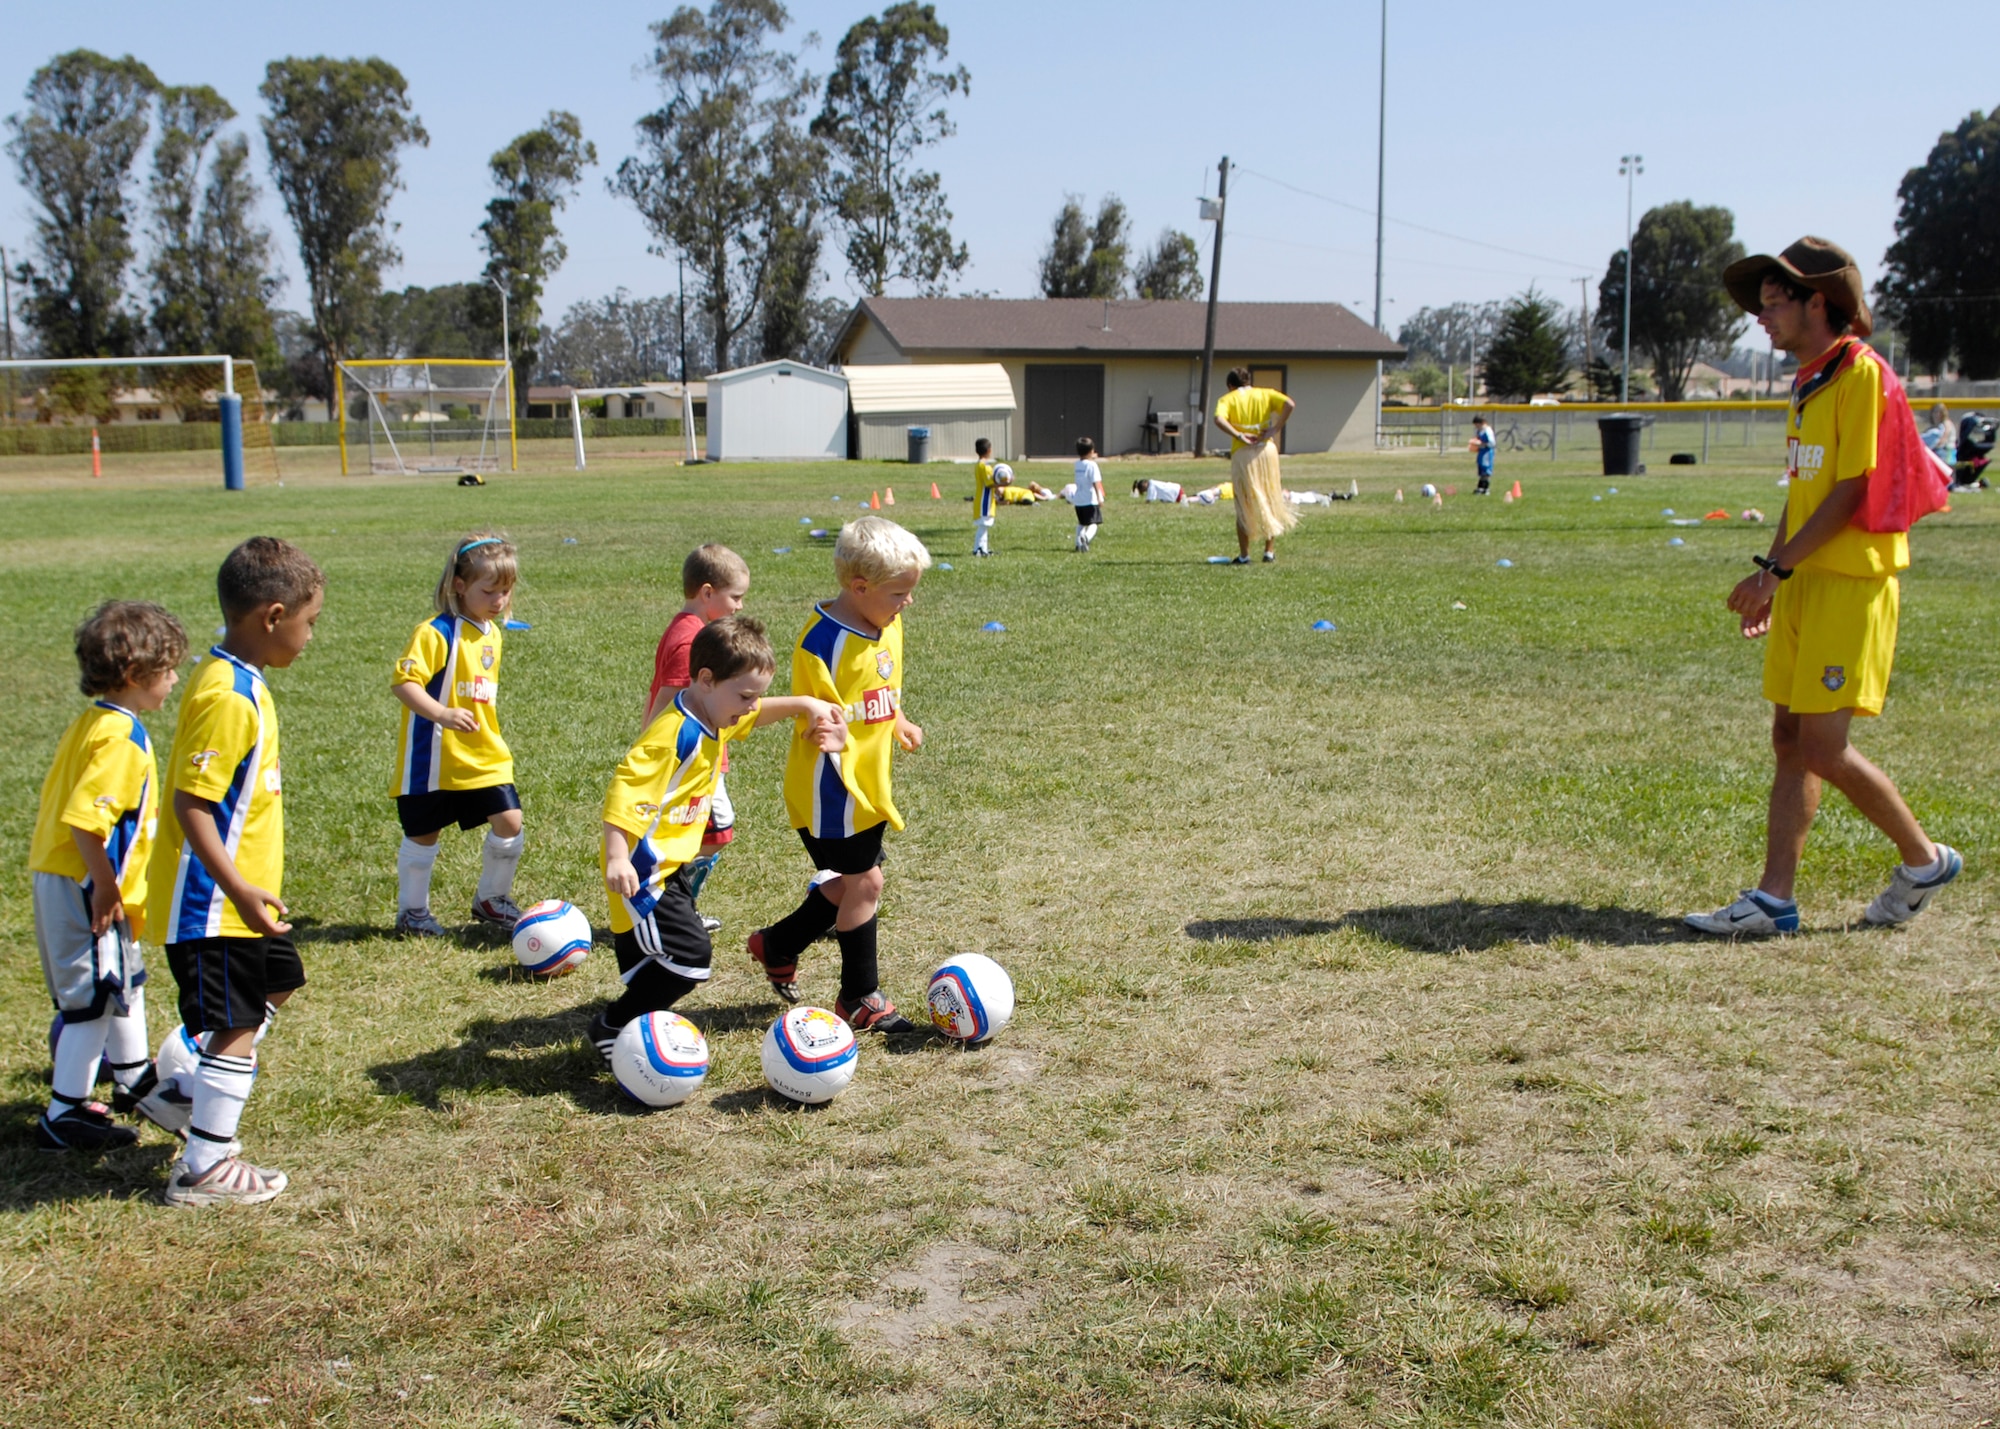 VANDENBERG AIR FORCE BASE, Calif. -- A coach with the Challenger Sports Soccer Camp here gives instruction to a group of children Friday. (U.S. Air Force photo / Airman 1st Class Heather Shaw)